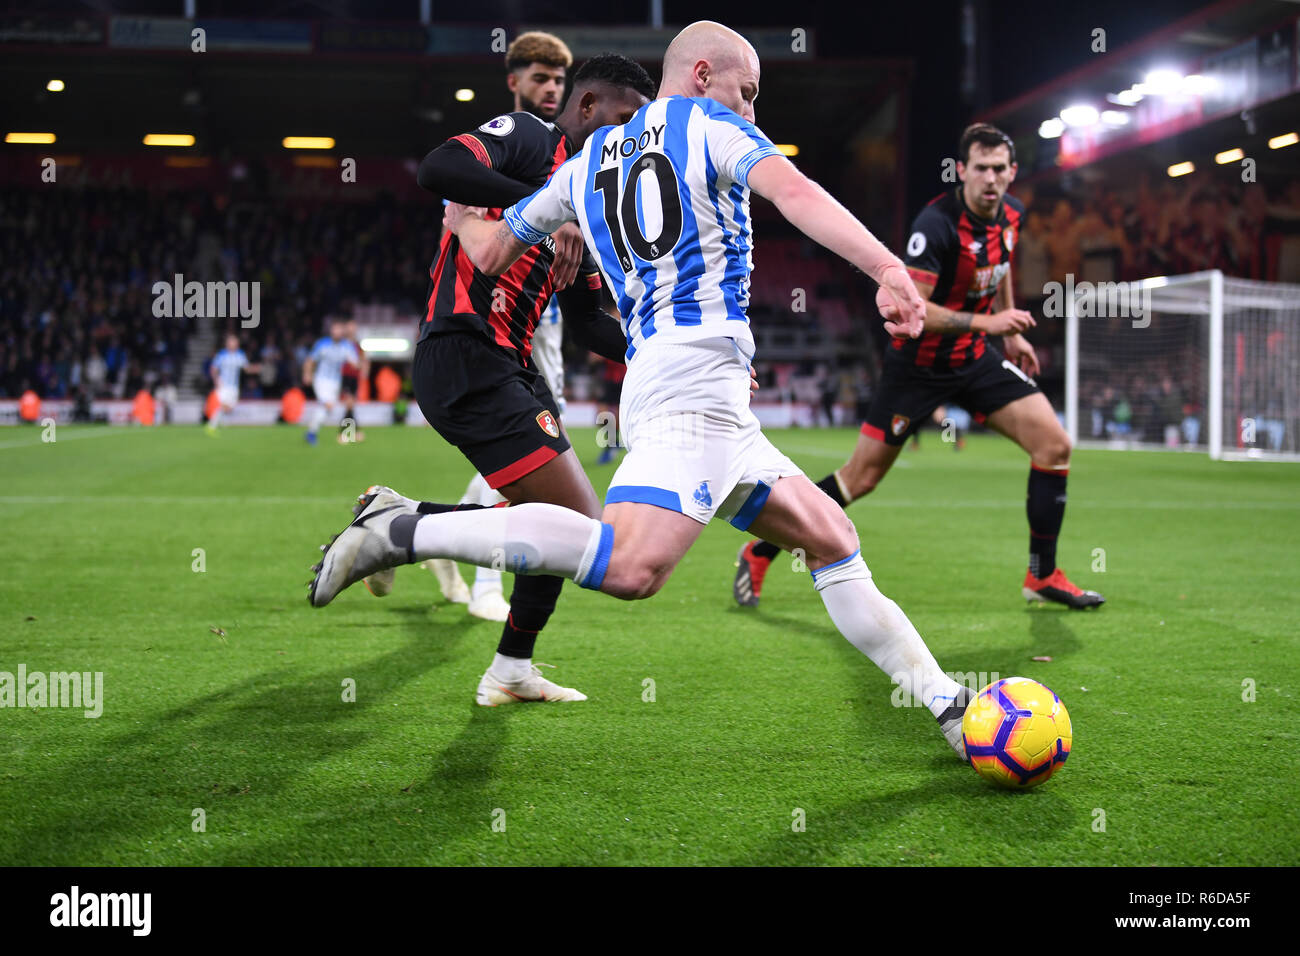 4th December 2018, Vitality Stadium, Bournemouth, England; EPL Premier League football, Bournemouth versus Huddersfield; Aaron Mooy of Huddersfield crosses the ball Stock Photo